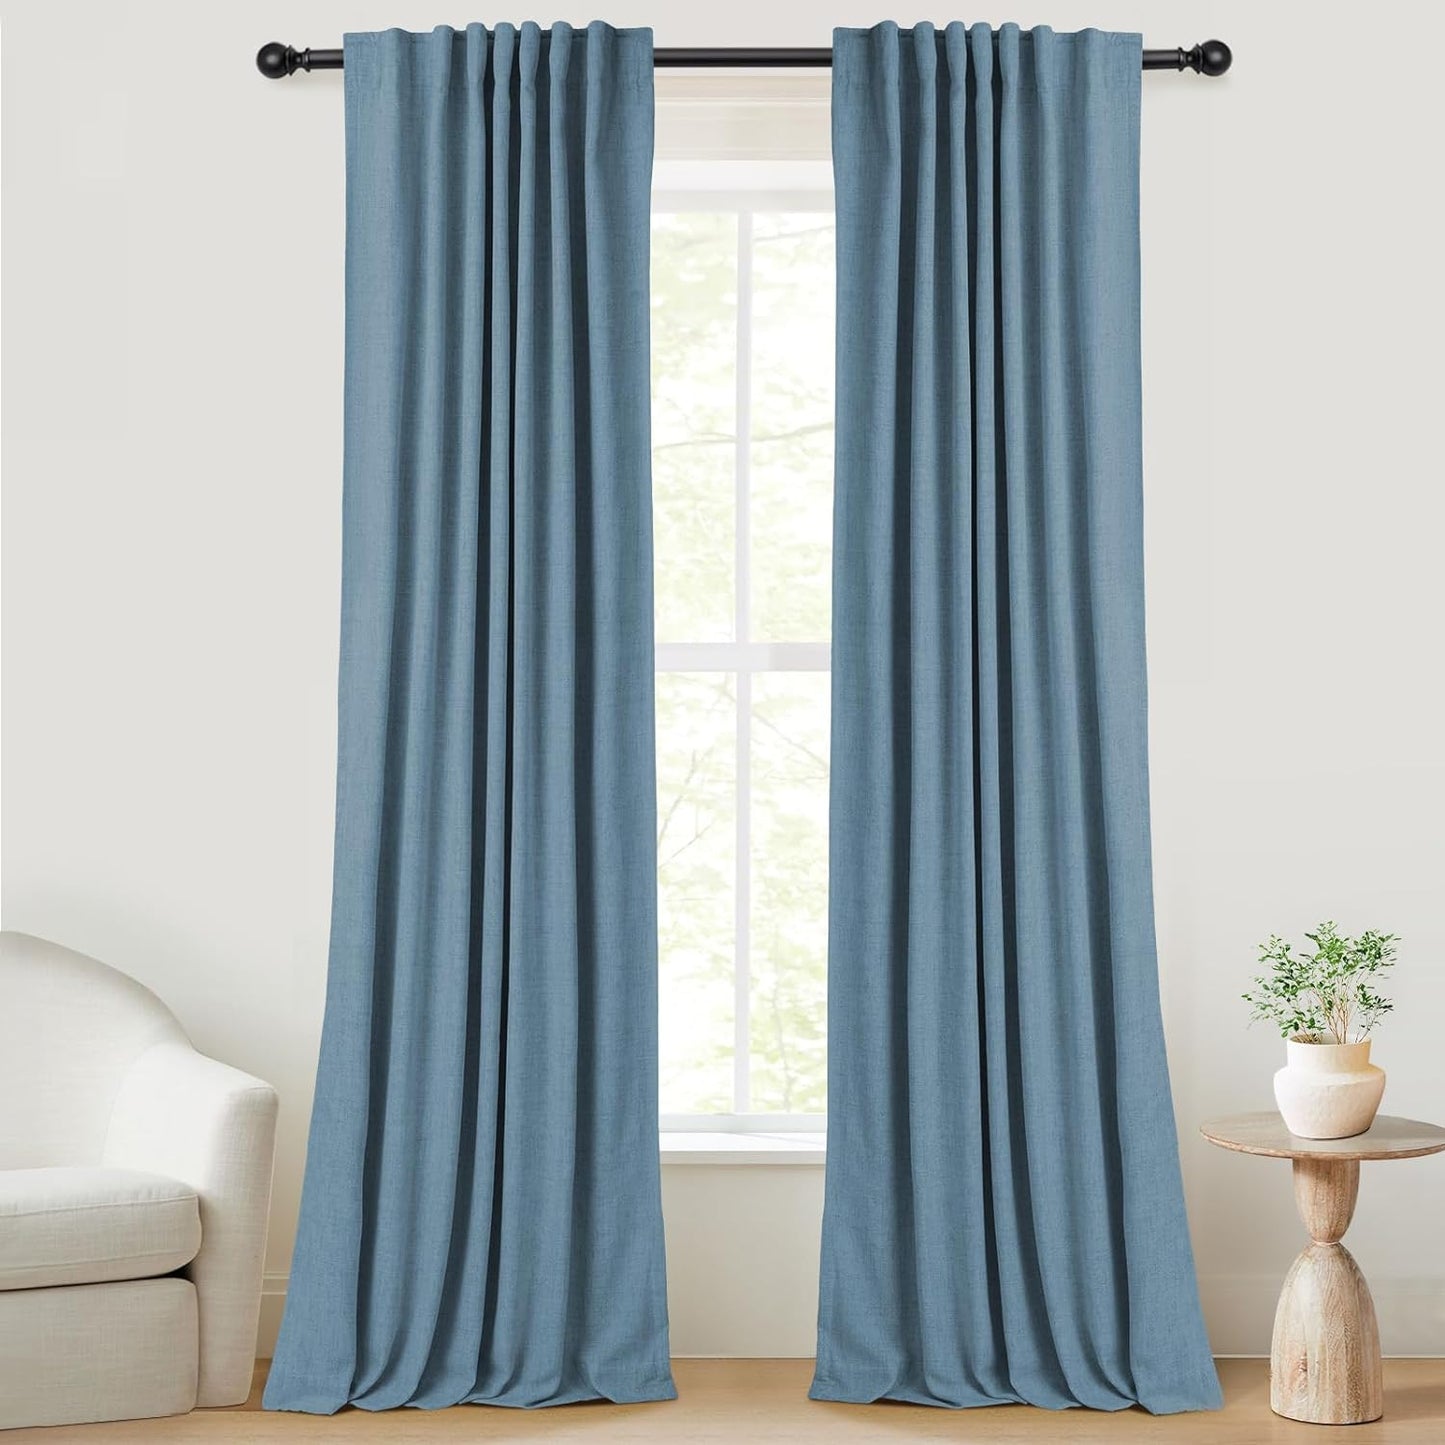 INOVADAY 100% Blackout Curtains 96 Inches Long 2 Panels Set, Thermal Insulated Linen Blackout Curtains for Bedroom, Back Tab/Rod Pocket Curtains & Drapes for Living Room - Beige, W50 X L96  INOVADAY 14 Stone Blue 50''W X 108''L 